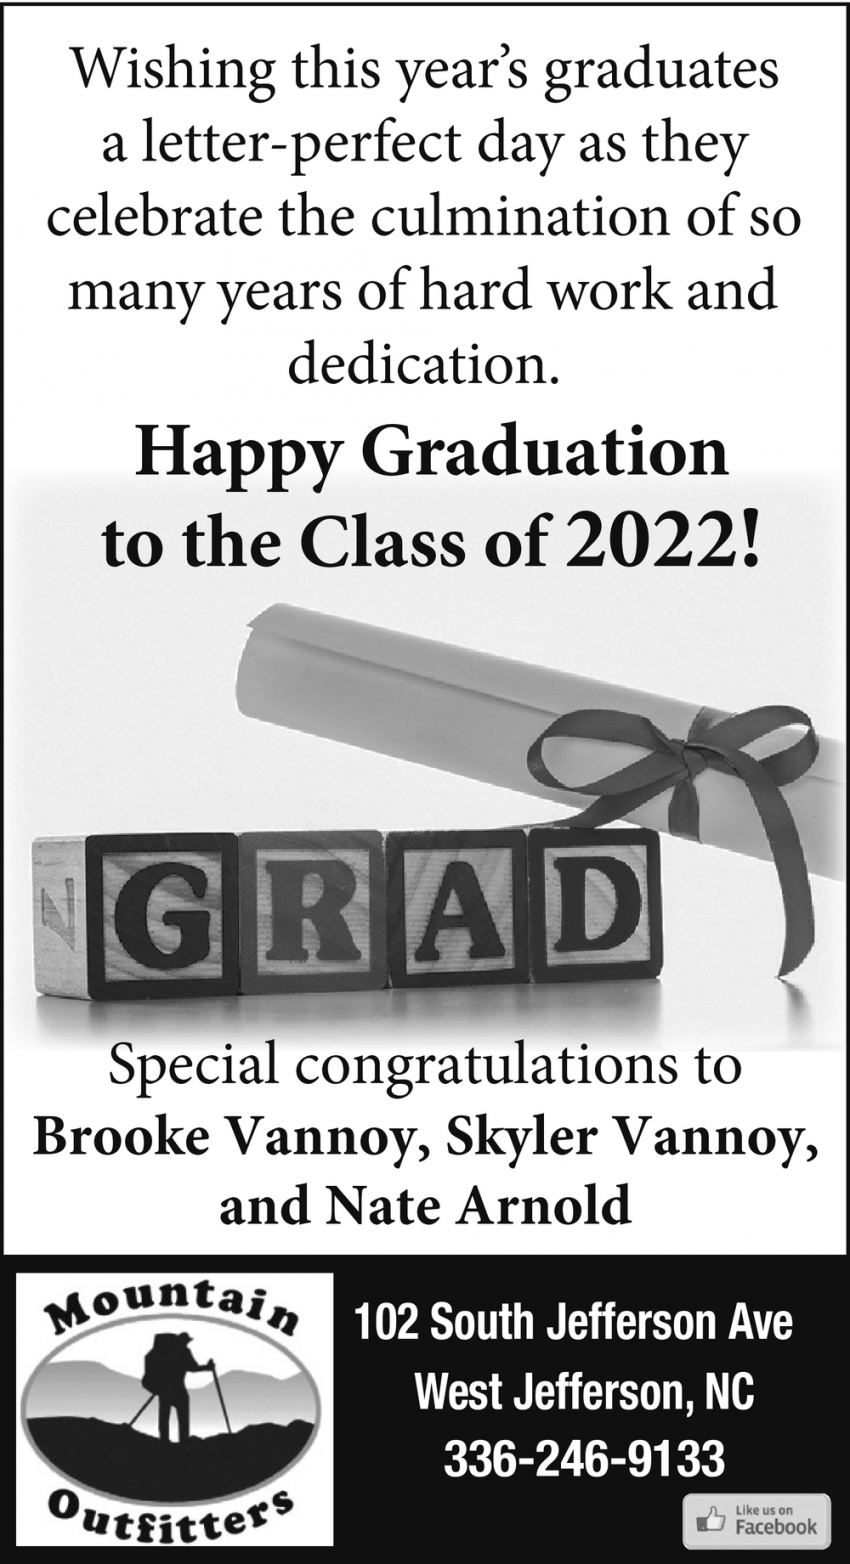 Happy Graduation to the Class of 2022!